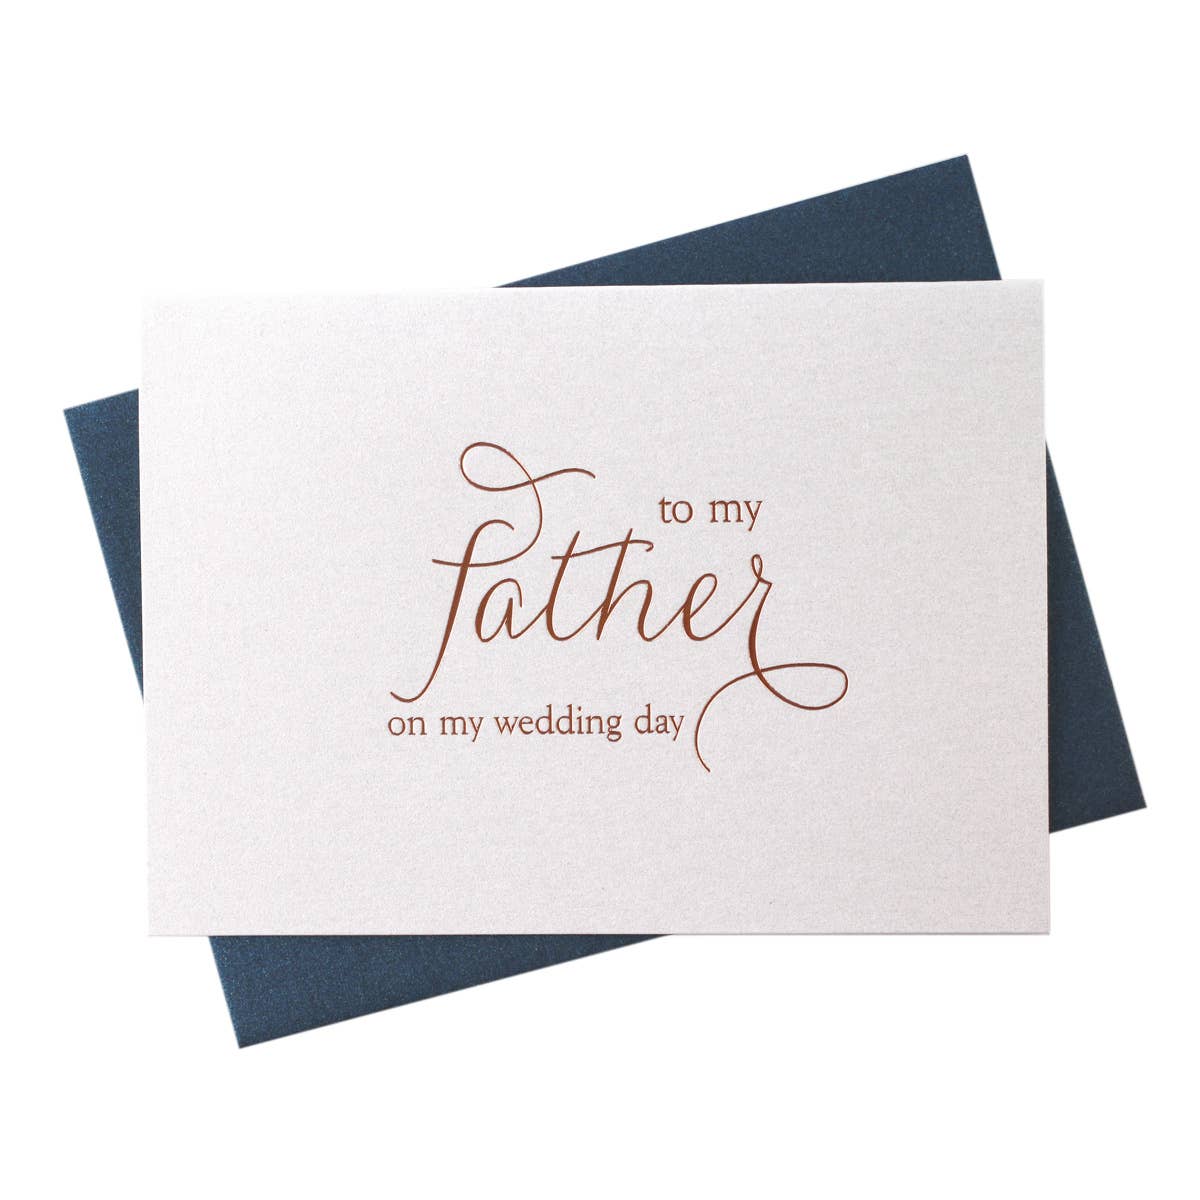 Foil To My Father on My Wedding Day Card from Bride